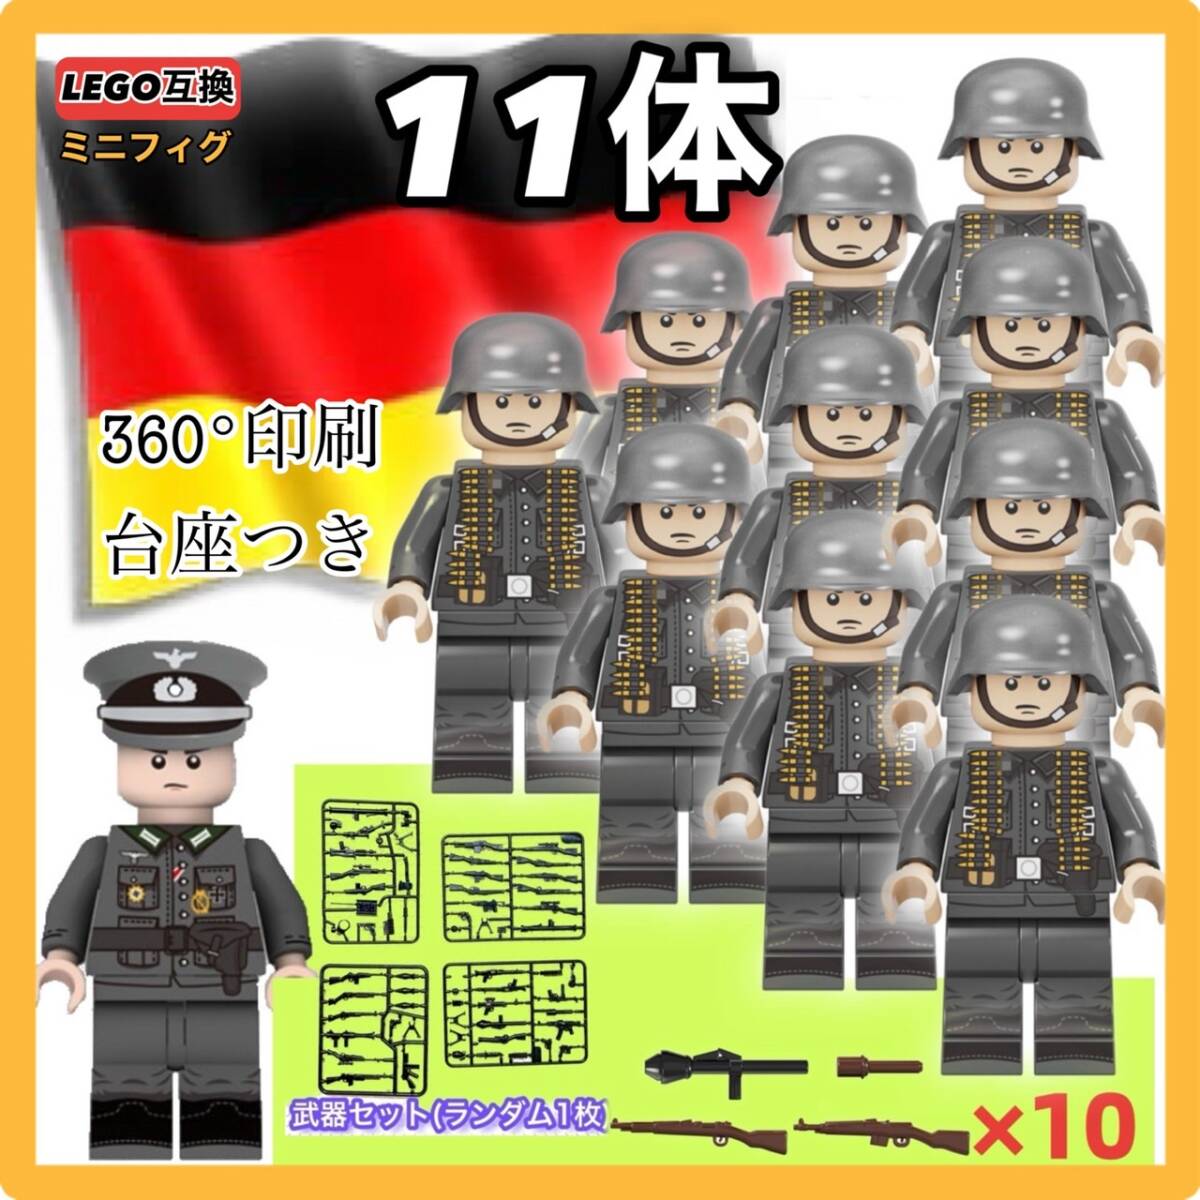 11 body set second next world large war WW2 Germany army whole surface printing E 360° military weapon Lego interchangeable Mini fig figure set sale free shipping anonymity delivery 